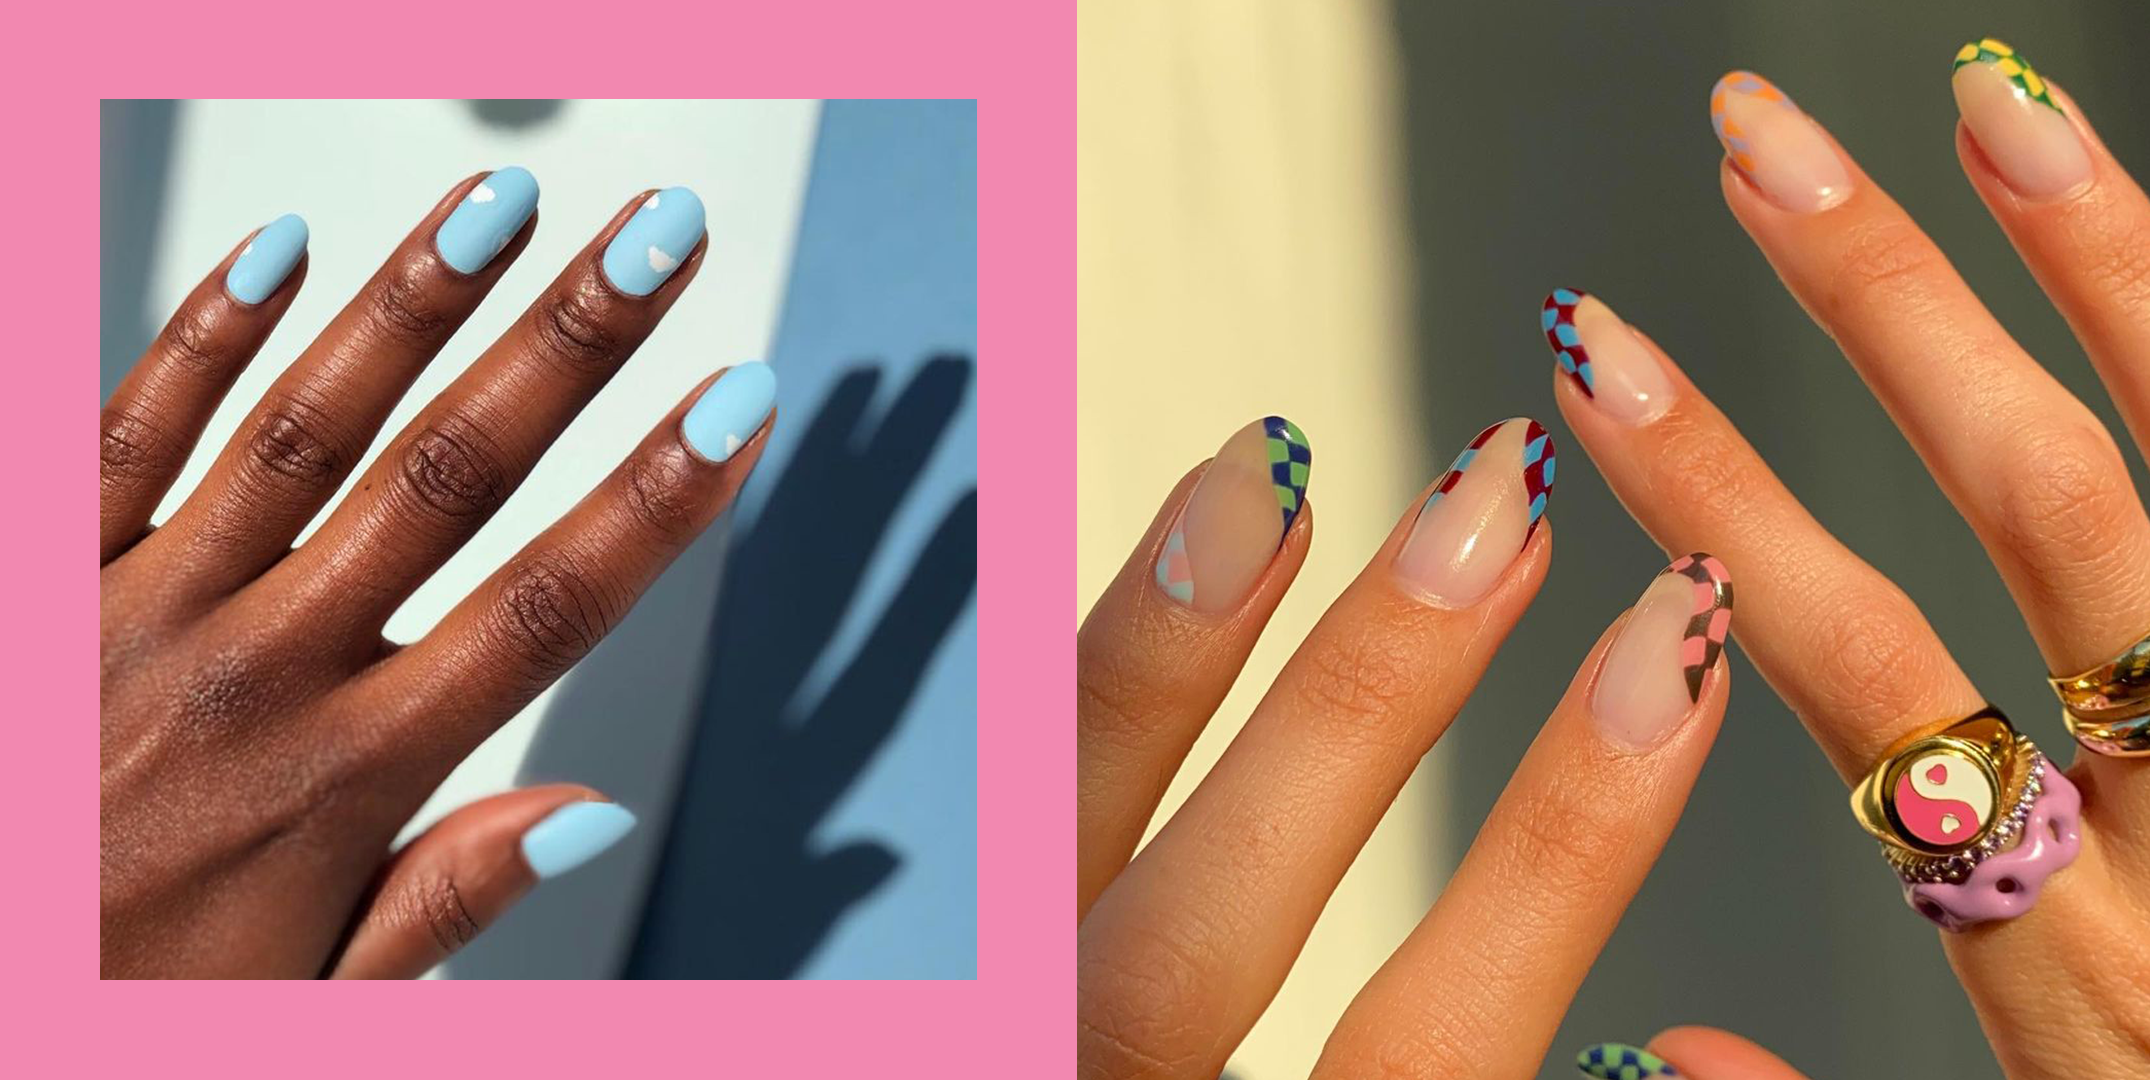 6. "Ombre nail colors for spring" - wide 7